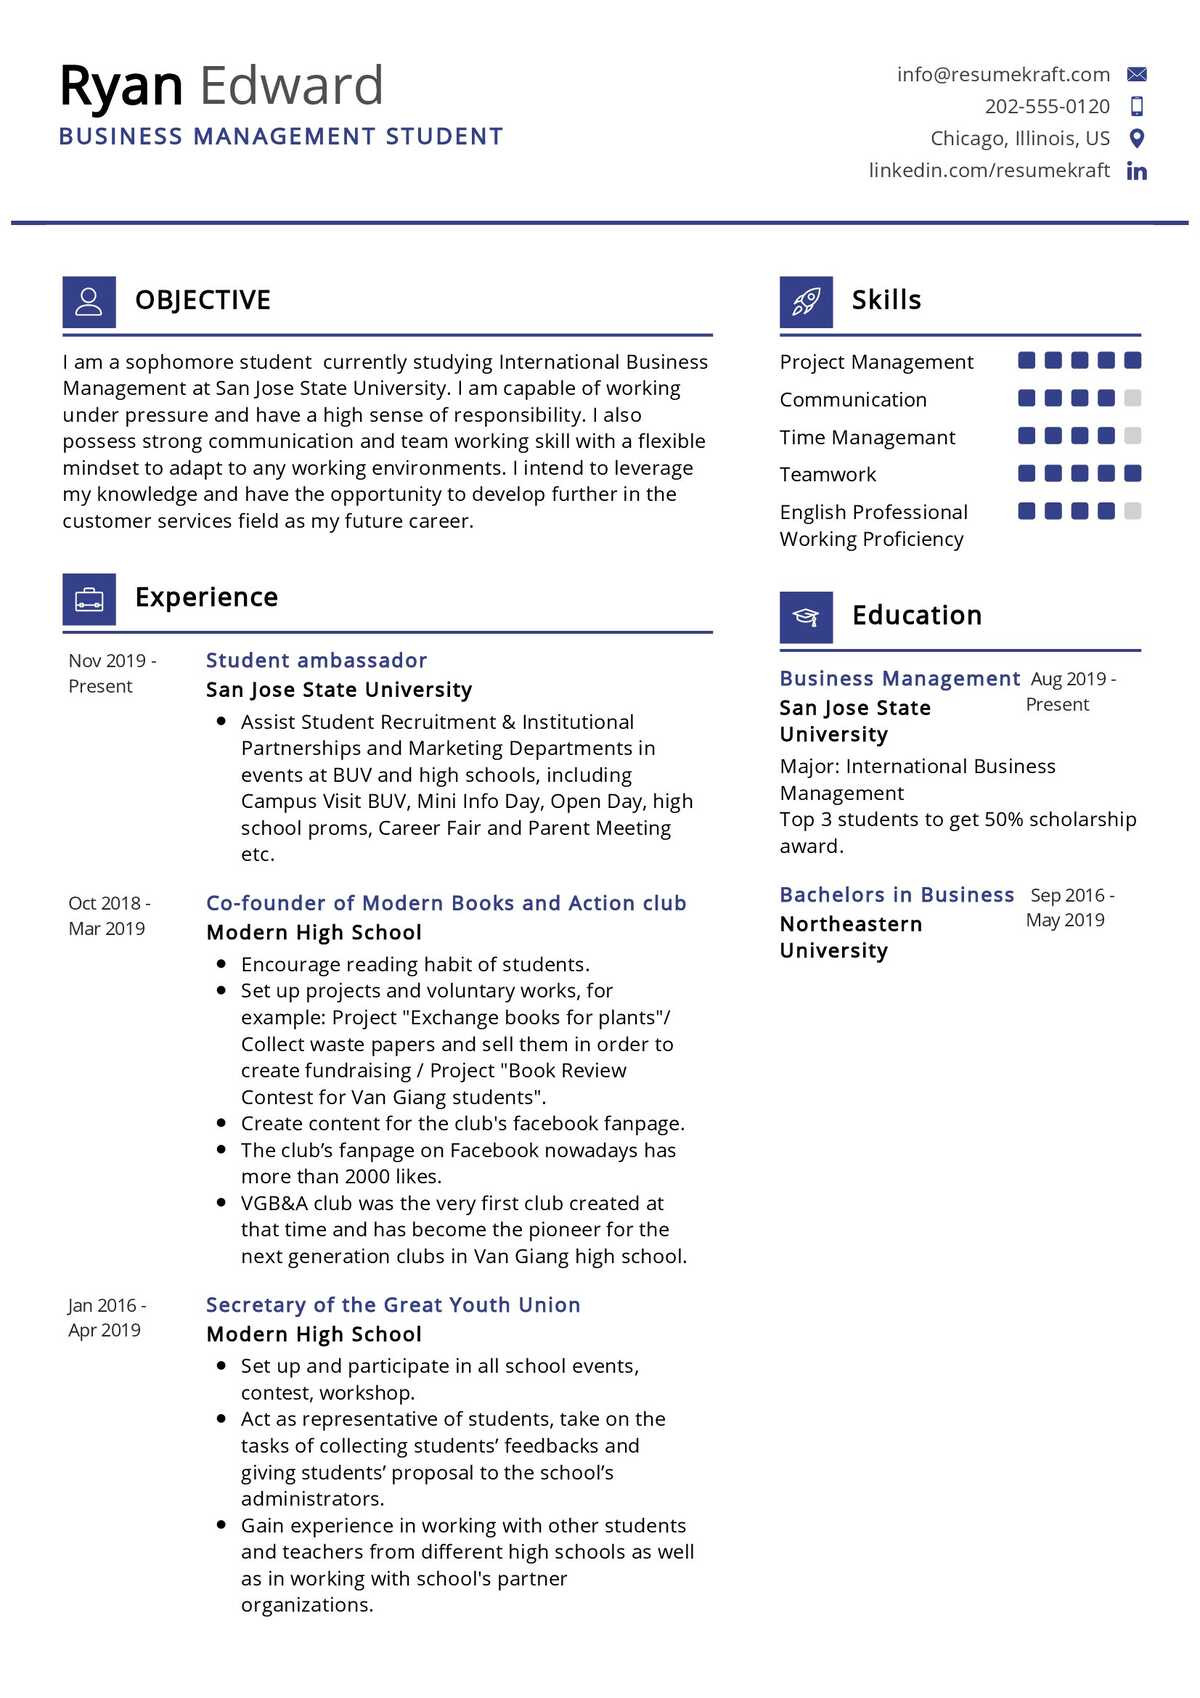 Sample Resume for School Business Manager Business Management Student Resume Example 2022 Writing Tips …